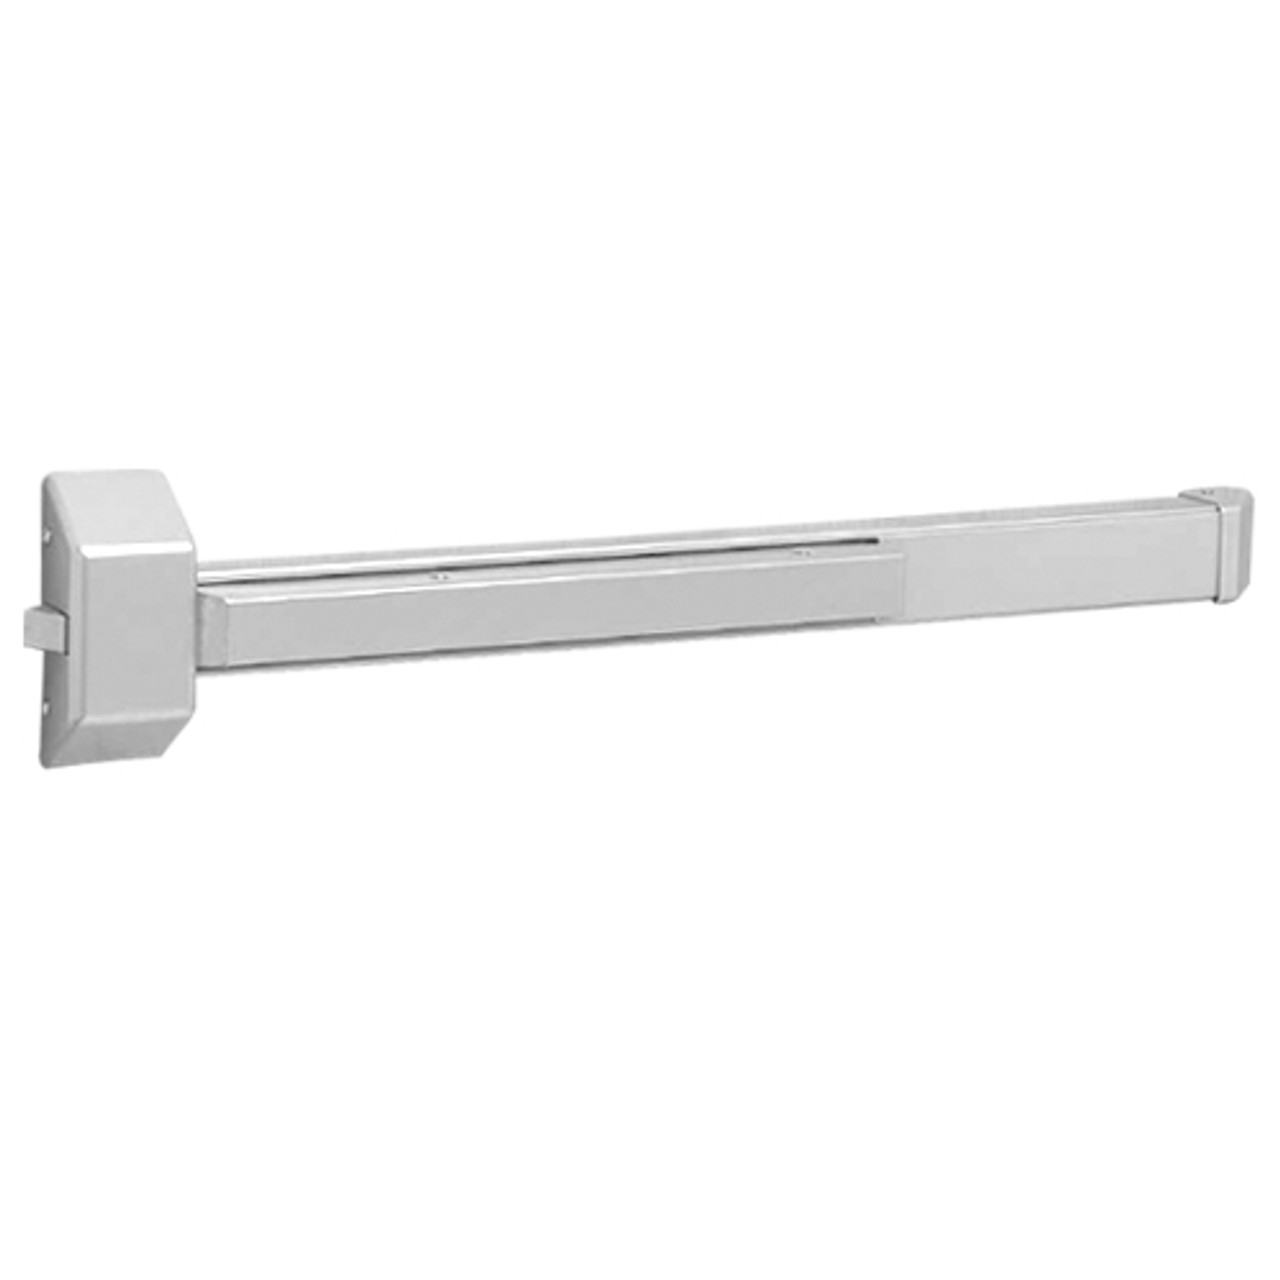 12-3828F-EN Sargent 30 Series Reversible Fire Rated Rim Exit Device in Sprayed Aluminum